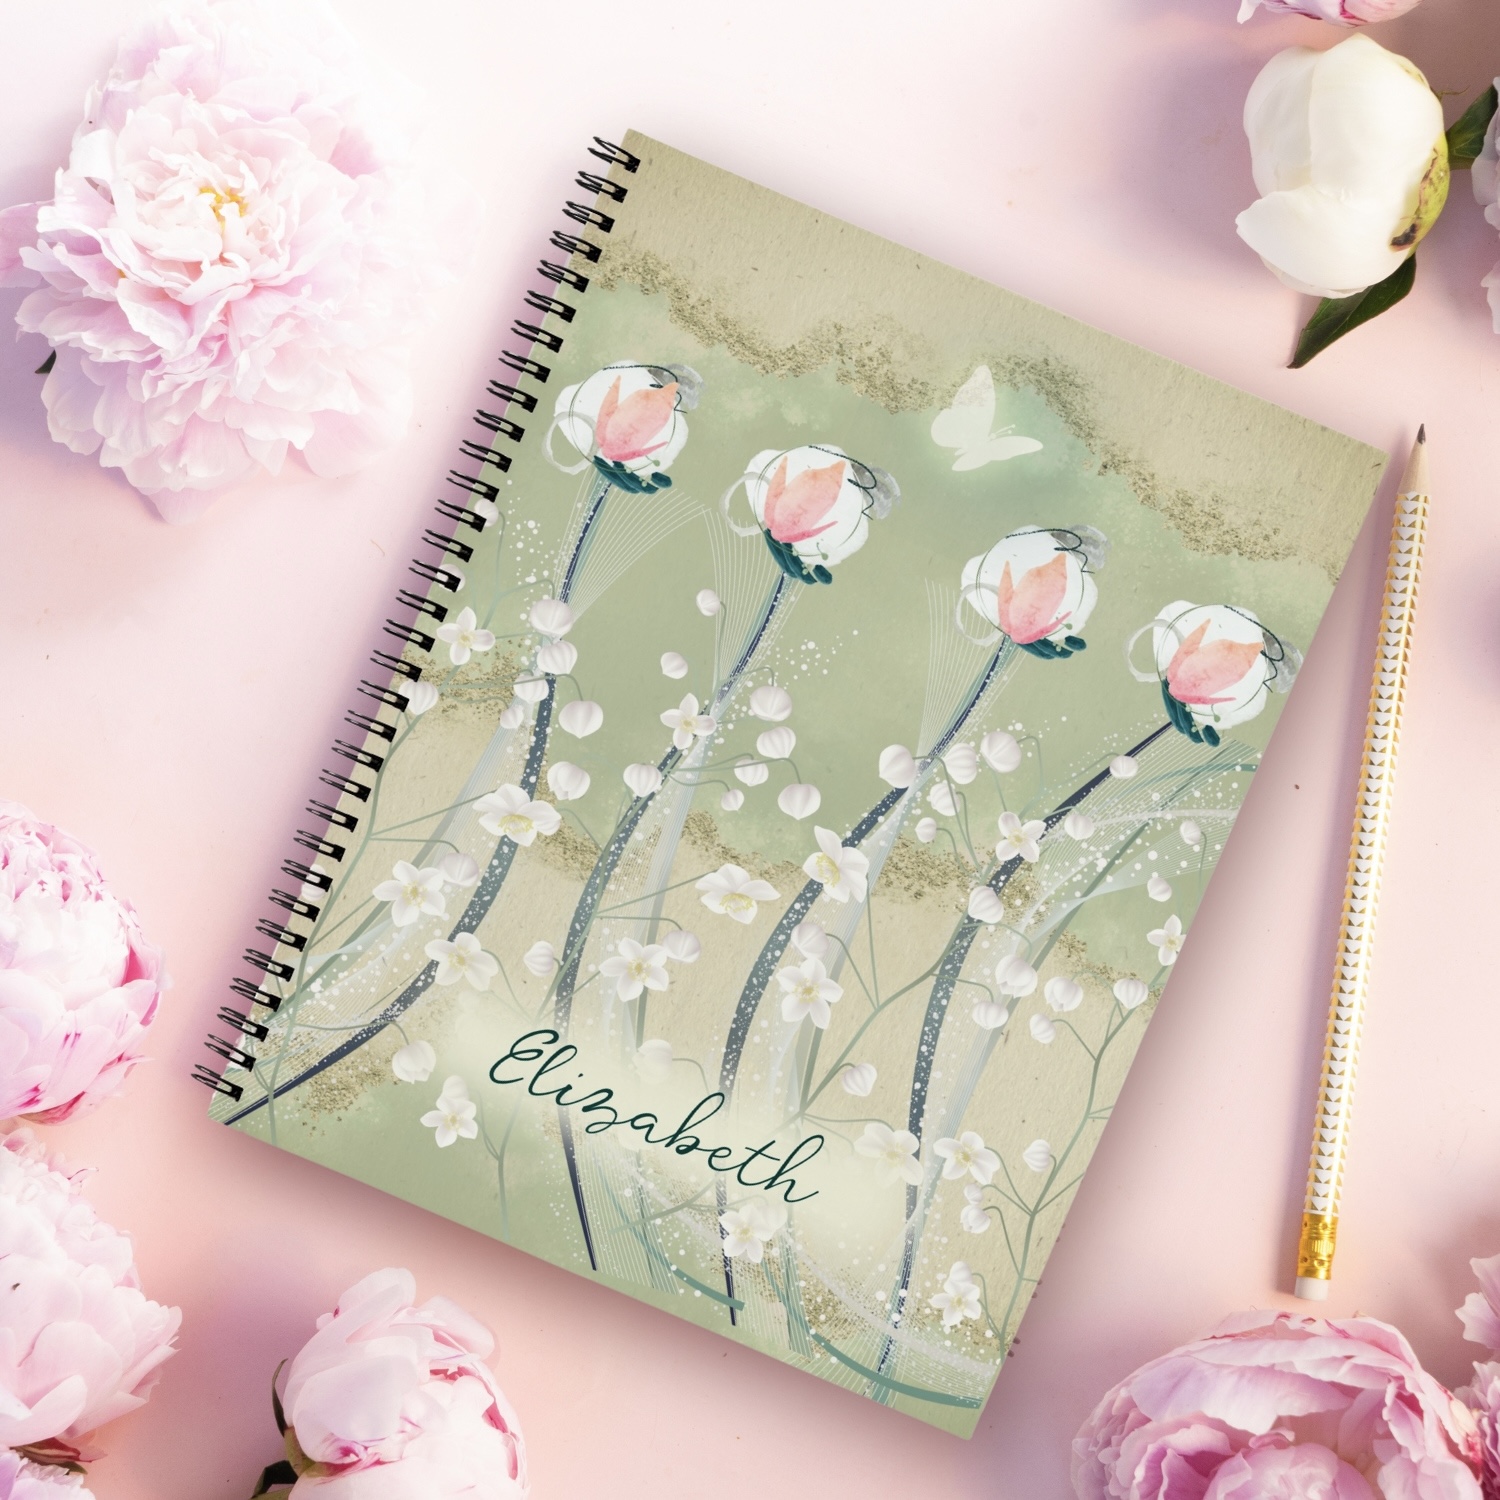 A notebook with a moss green and white floral design, featuring delicate pastel flowers and earthy beige accents. The notebook's cover includes a subtle white butterfly, adding a touch of bohemian charm. With lined pages for note-taking and a durable hardcover, this notebook is perfect for jotting down ideas or daily planning. Ideal for use in a she shed with throw pillows and mugs that reflect a boho style.